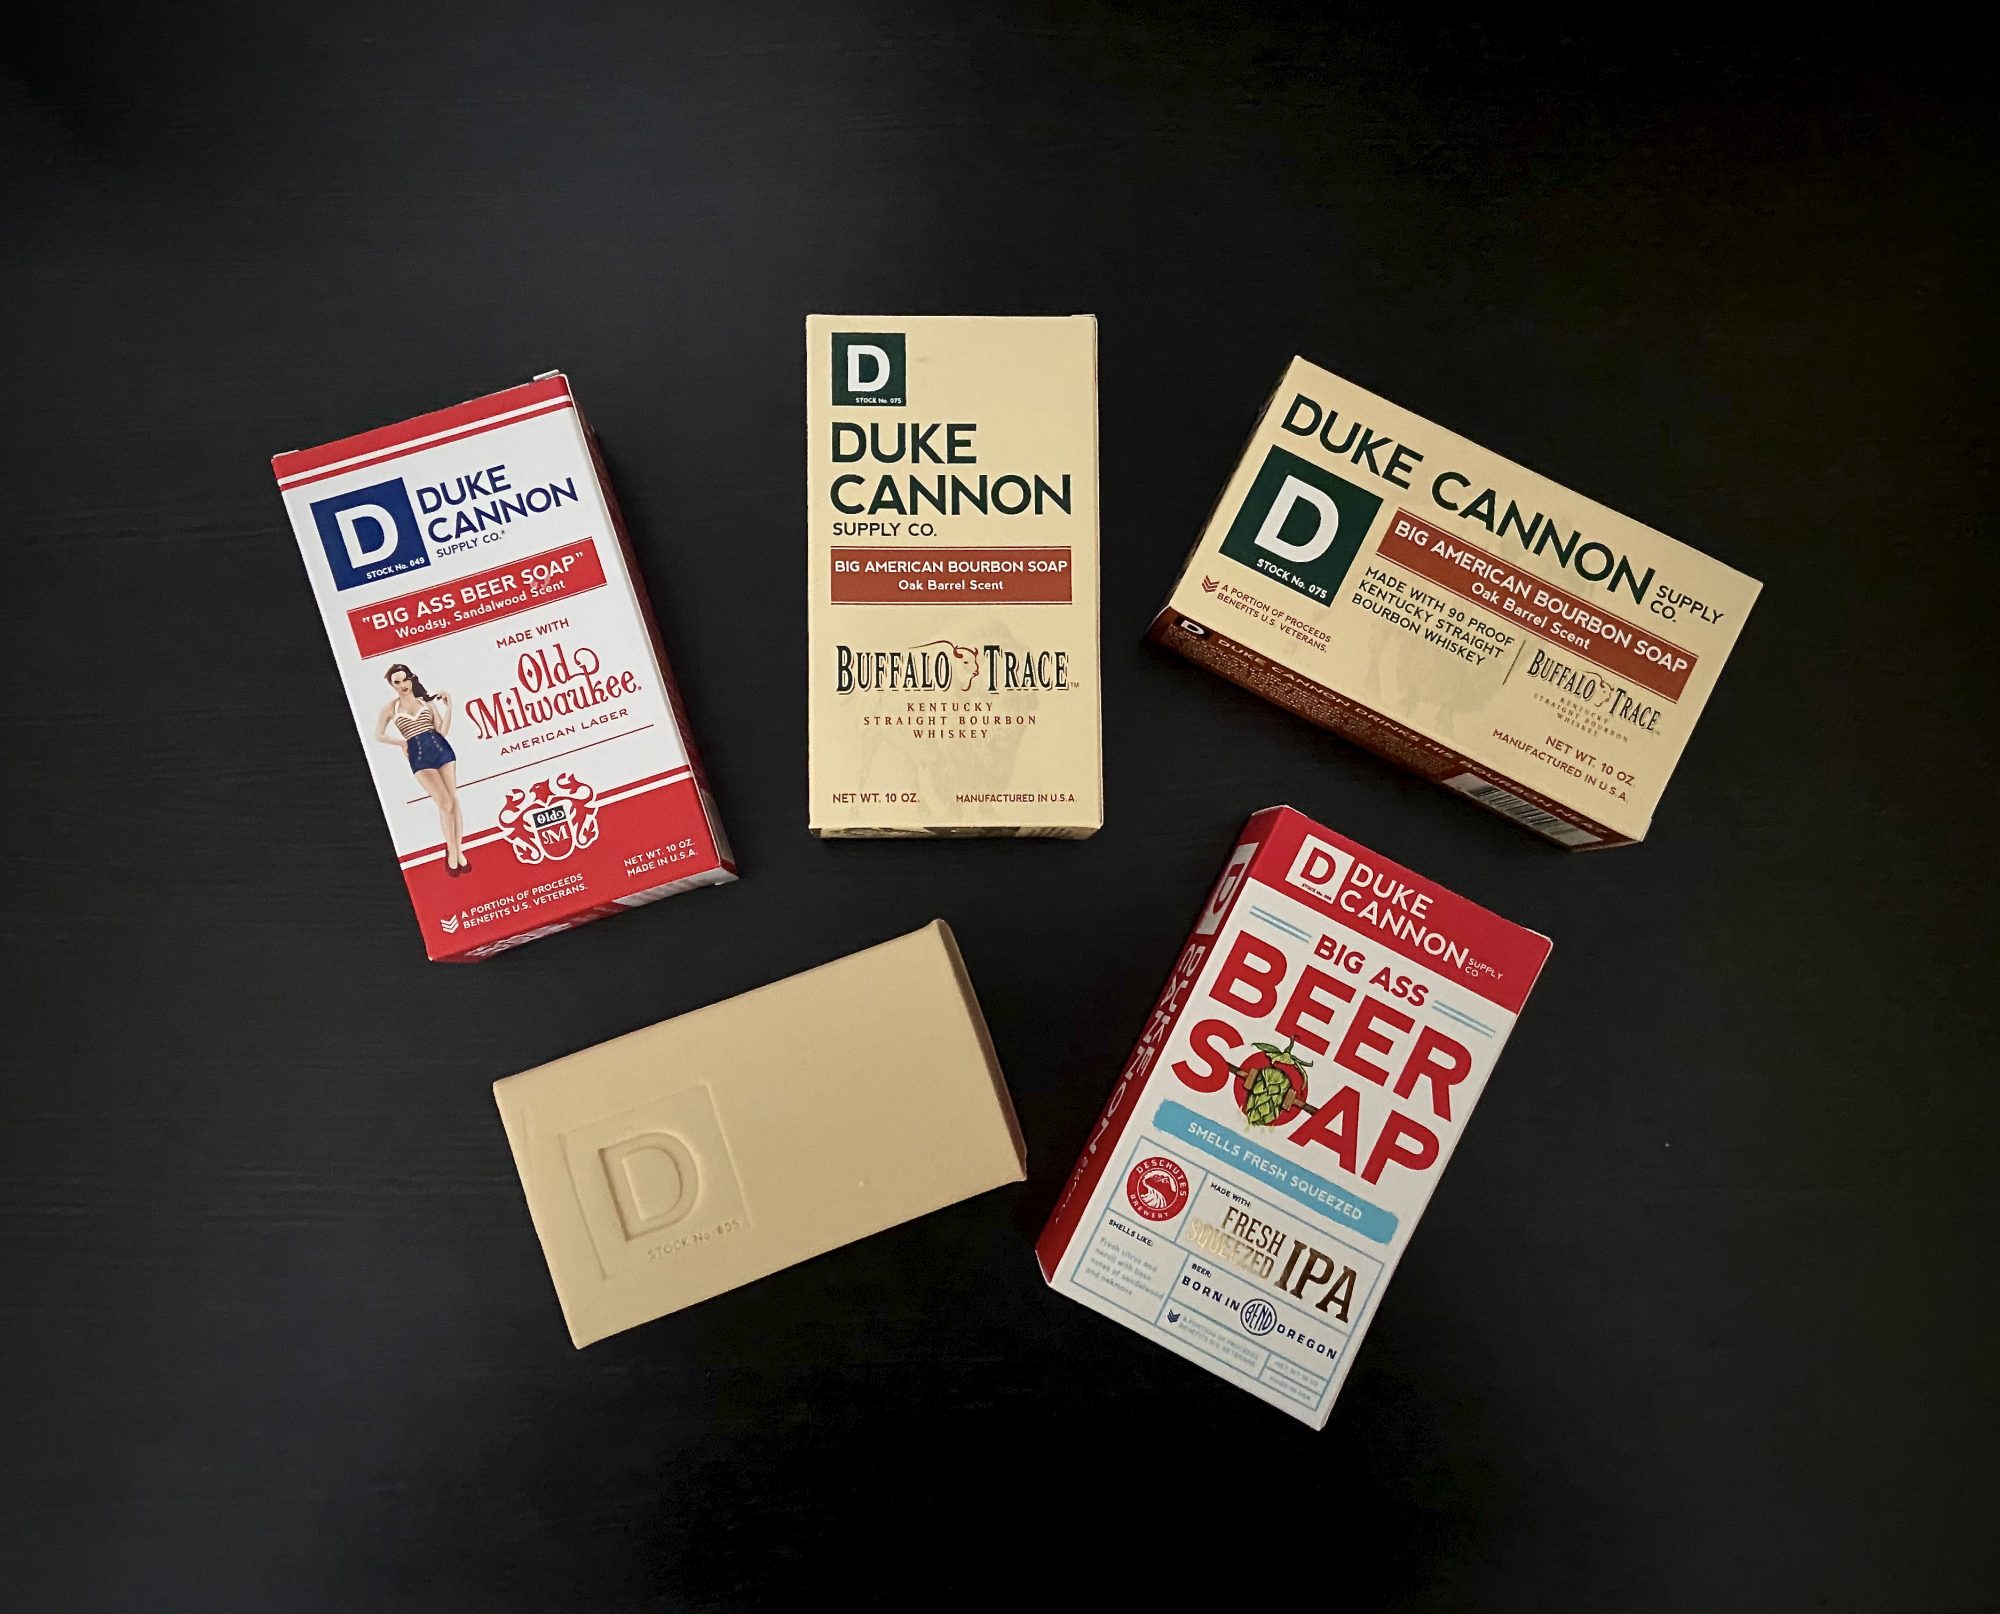 The Beer and Bourbon Box – Deschutes Fresh Squeezed IPA Soap, Old Milwaukee Soap, and Buffalo Trace Bourbon Soap from Duke Cannon Supply Co.